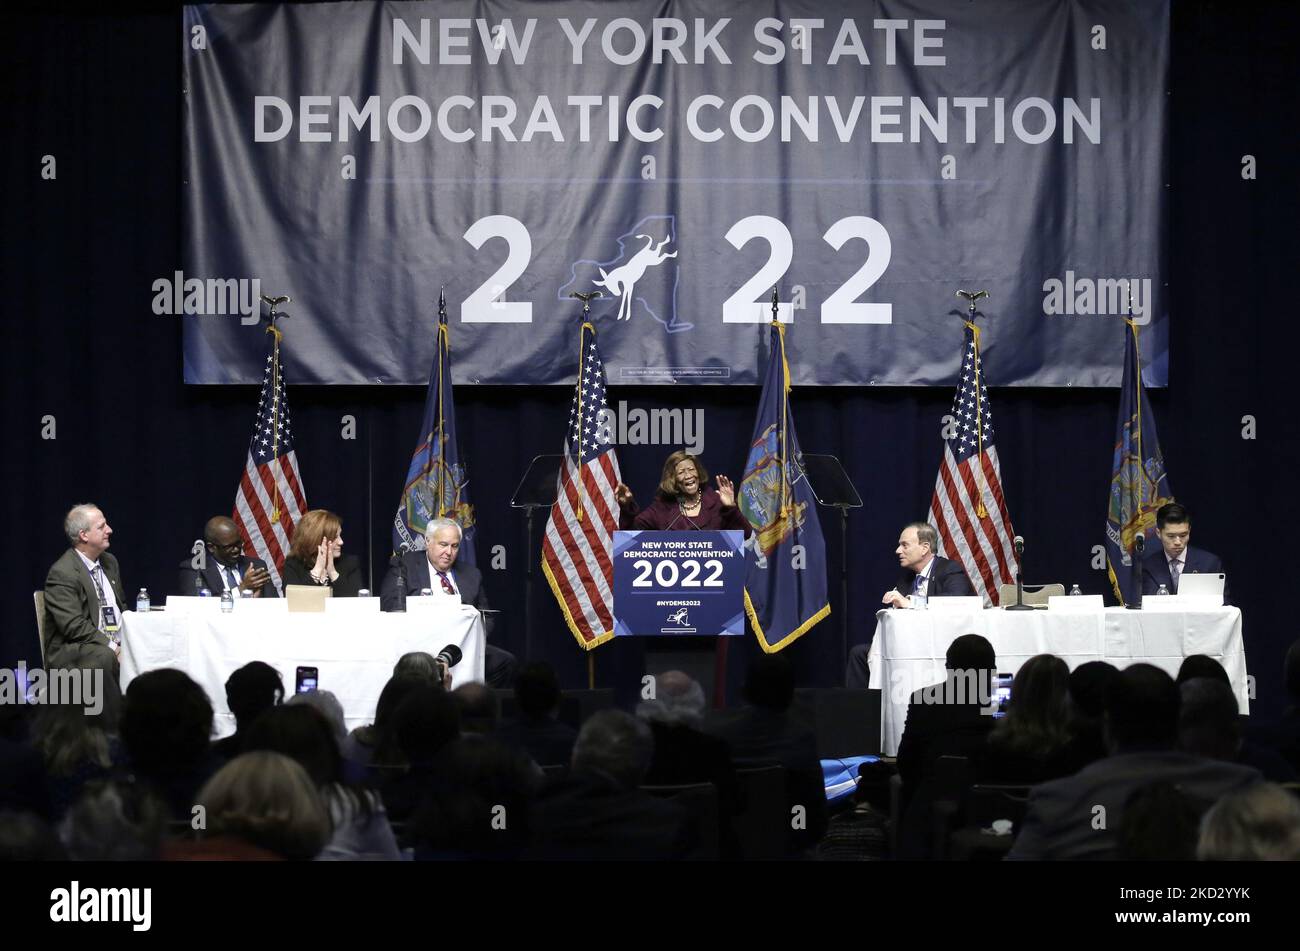 Hazel Dukes speaks during the 2022 New York State Democratic Convention at the Sheraton New York Times Square Hotel on February 17, 2022 in New York City. Former Secretary of State , Hillary Clinton introduced Kathy Hochul as the nominee for Governor of New York State. Hochul along with Lt. Governor Brian Benjamin and others nominated for statewide offices will be on the ballot this year the year of midterm elections. (Photo by John Lamparski/NurPhoto) Stock Photo